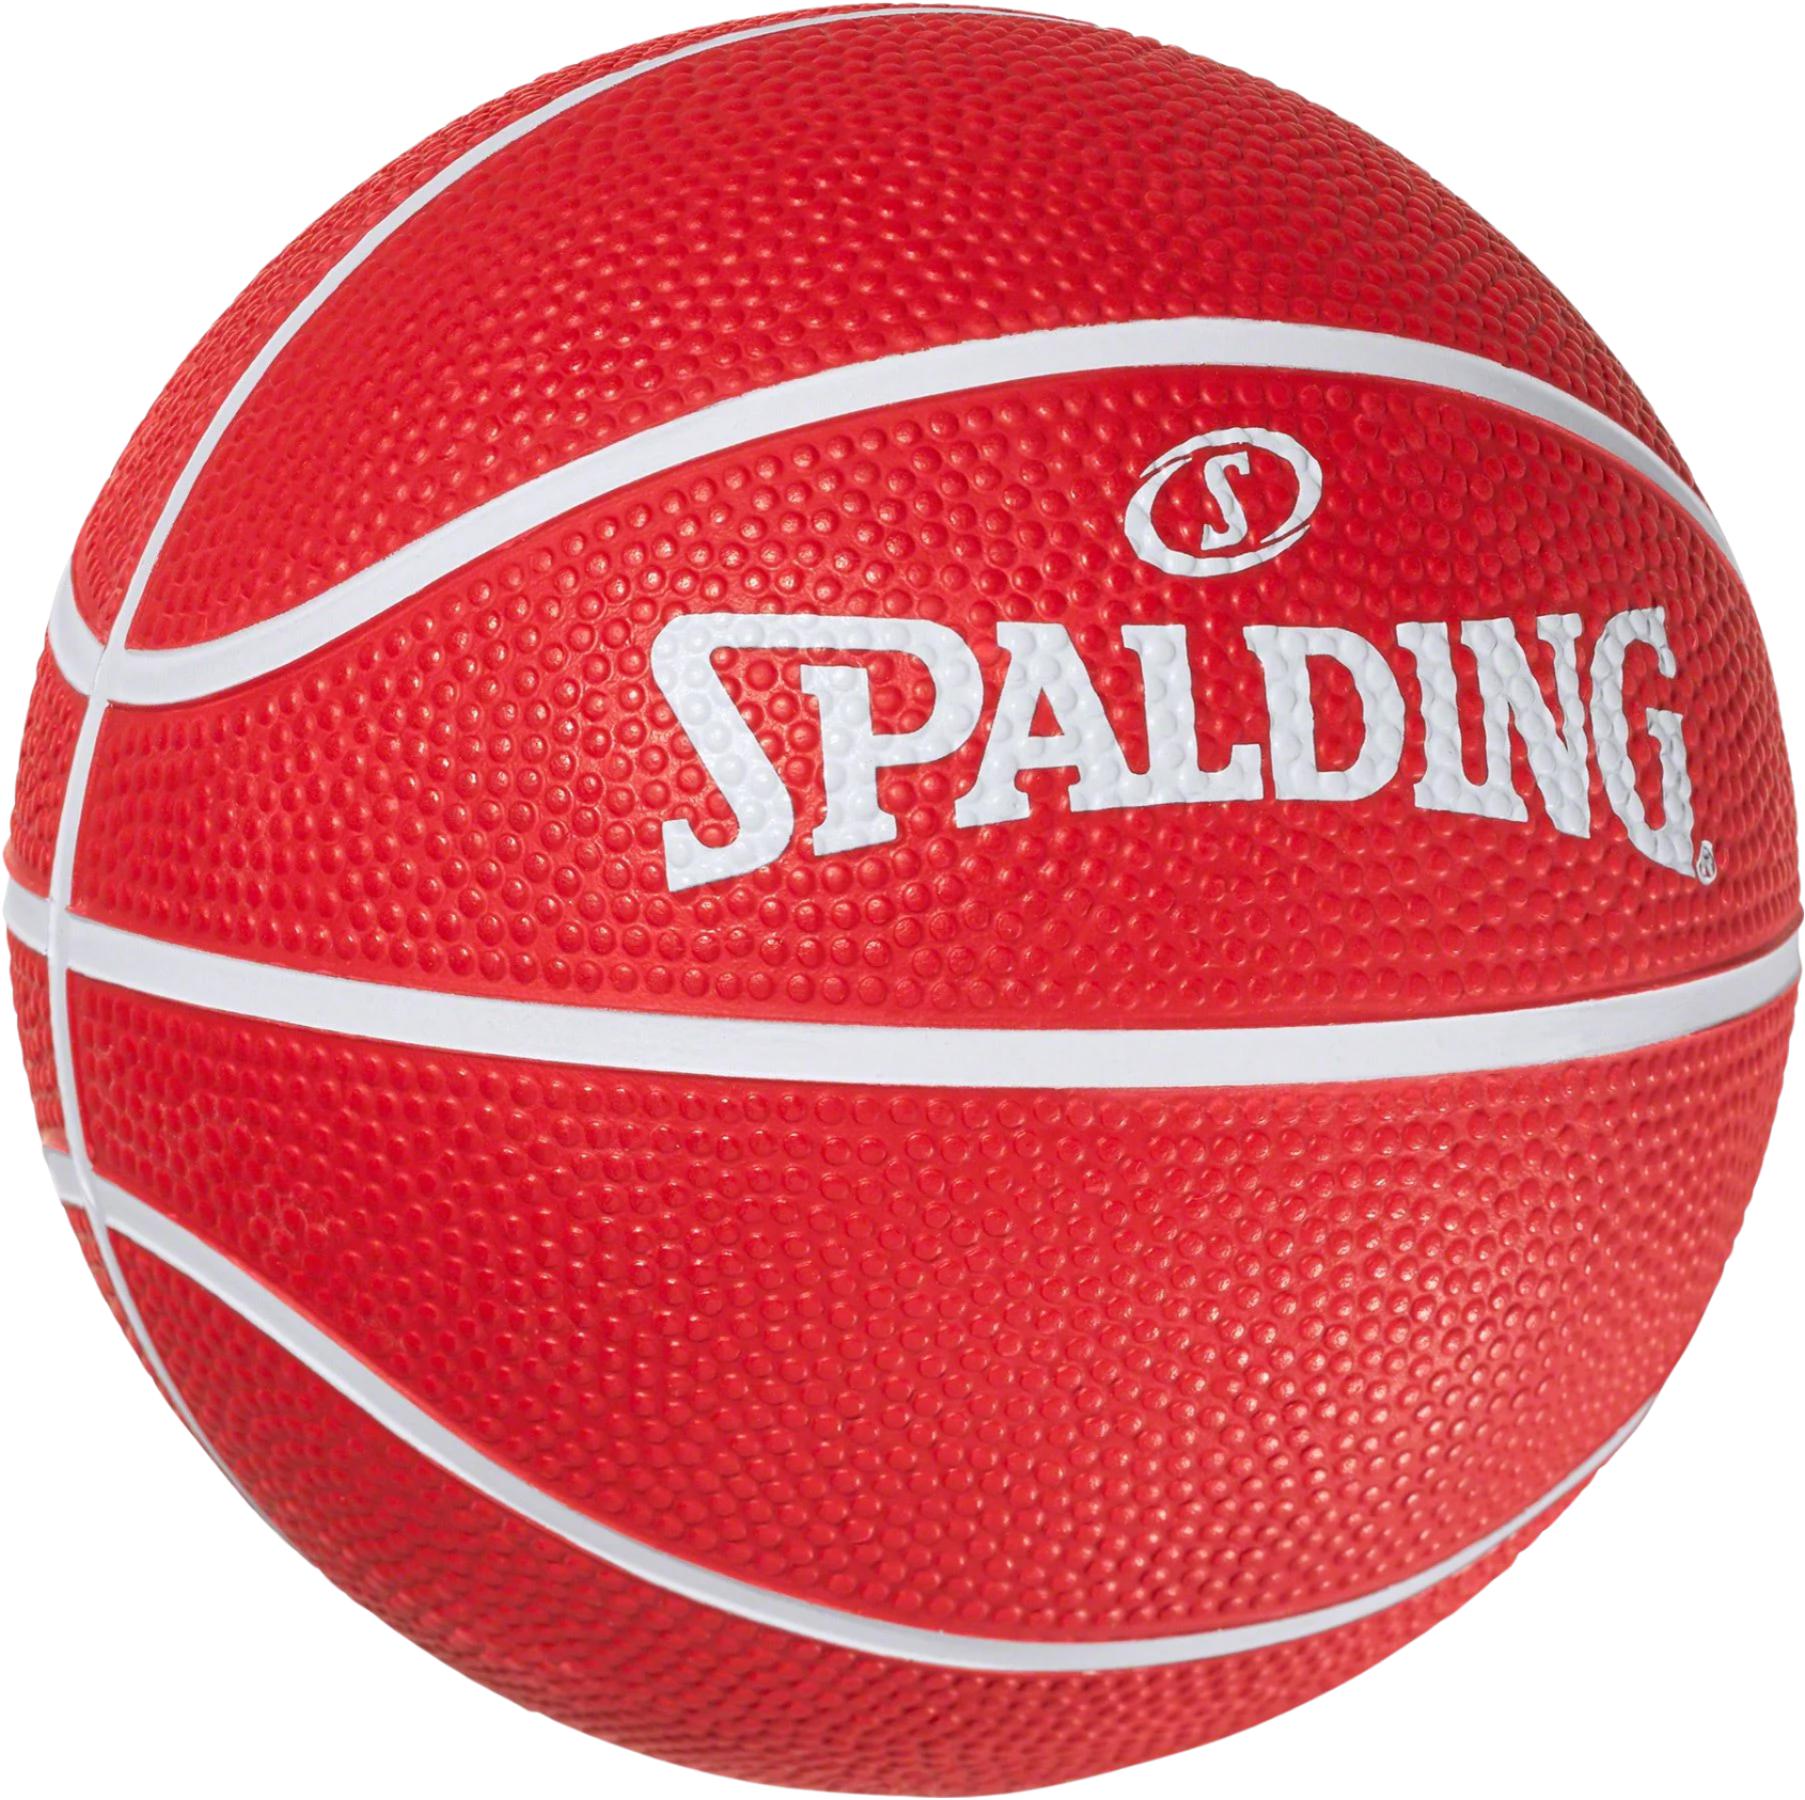 Supreme x Spalding Mini Basketball Hoop Red FW23 – SOLE SERIOUSS